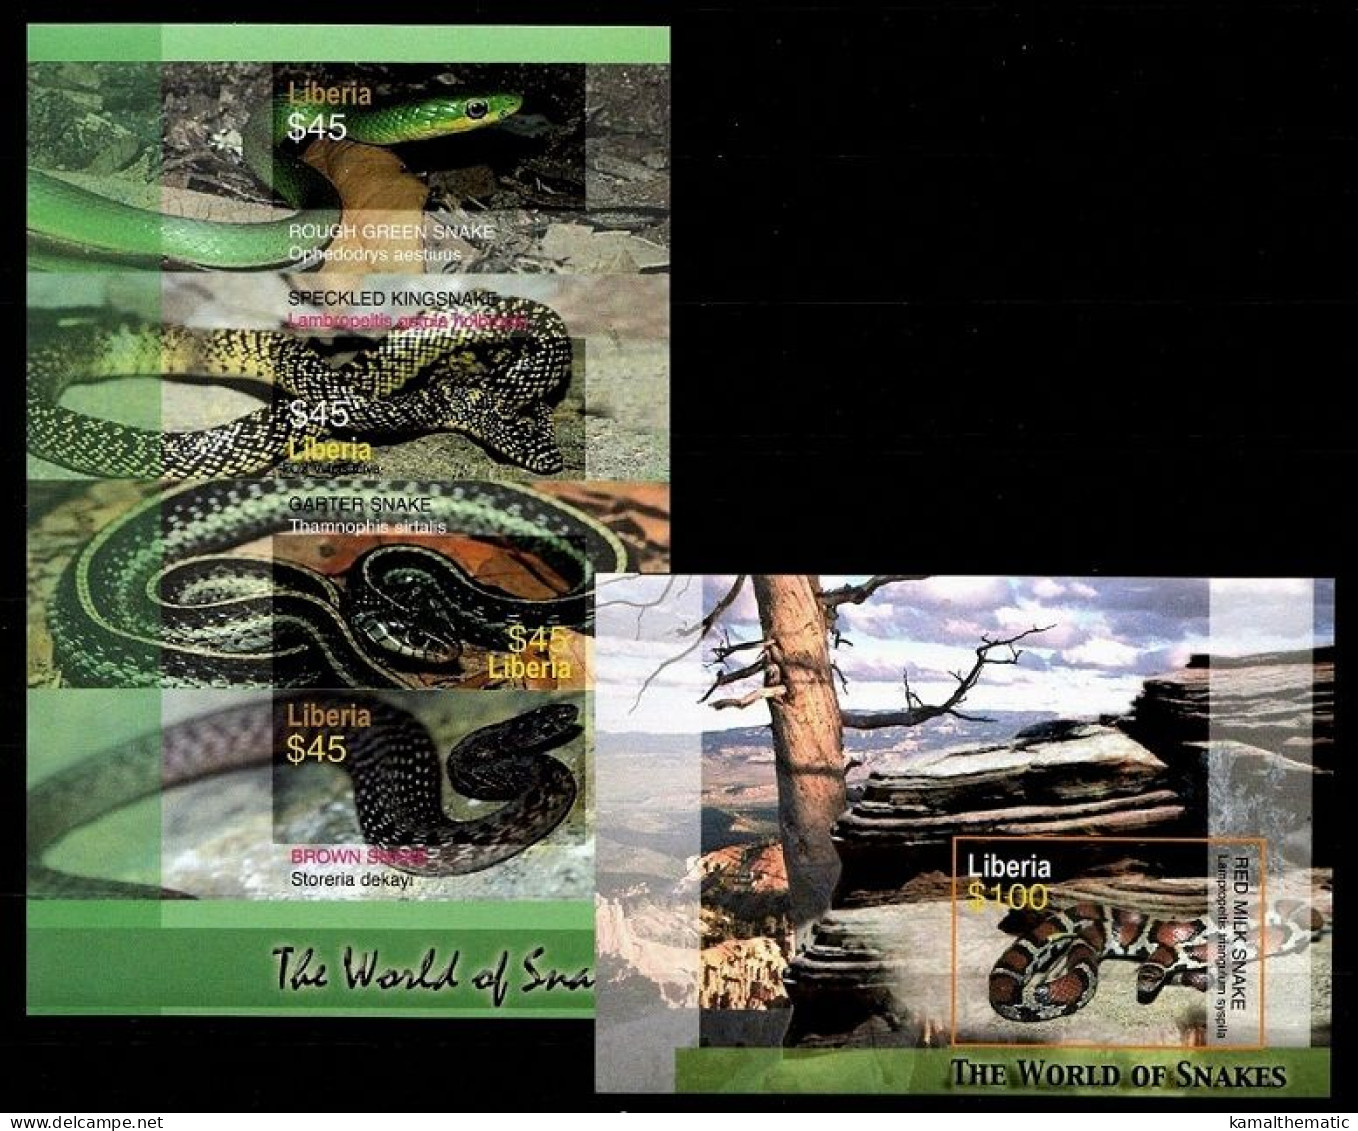 Rough Green, Speckled King, Red Milk, Garter, Snakes Reptiles, Liberia 2006 MNH Imperf MS+SS - Snakes